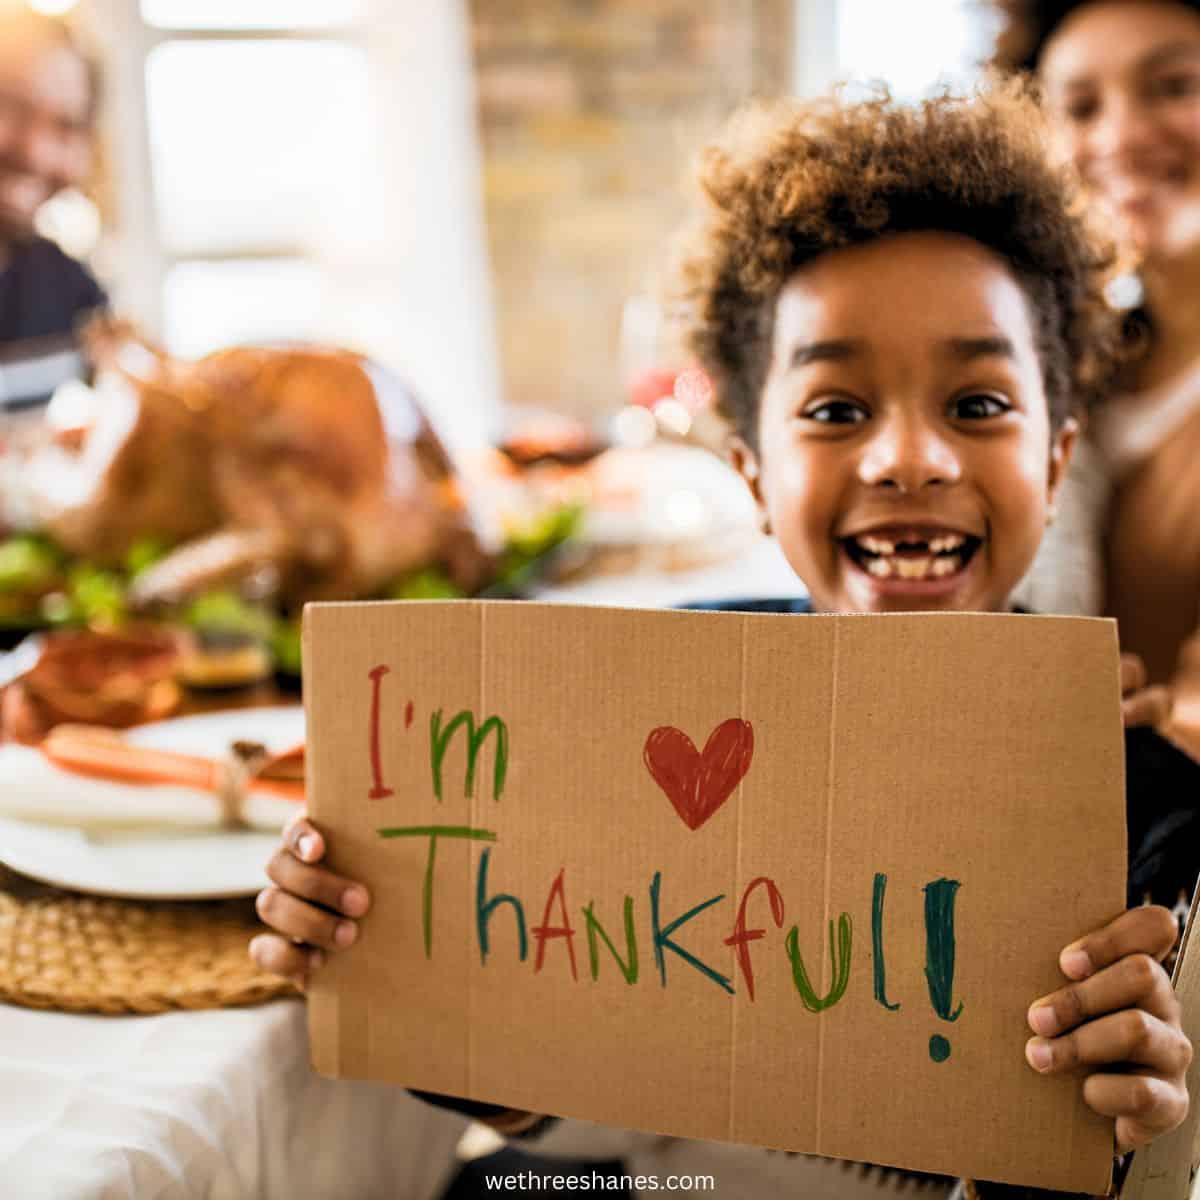 Young, smiling boy holding up a sign that reads, "I'm thankful!" with a thanksgiving dinner in the background.